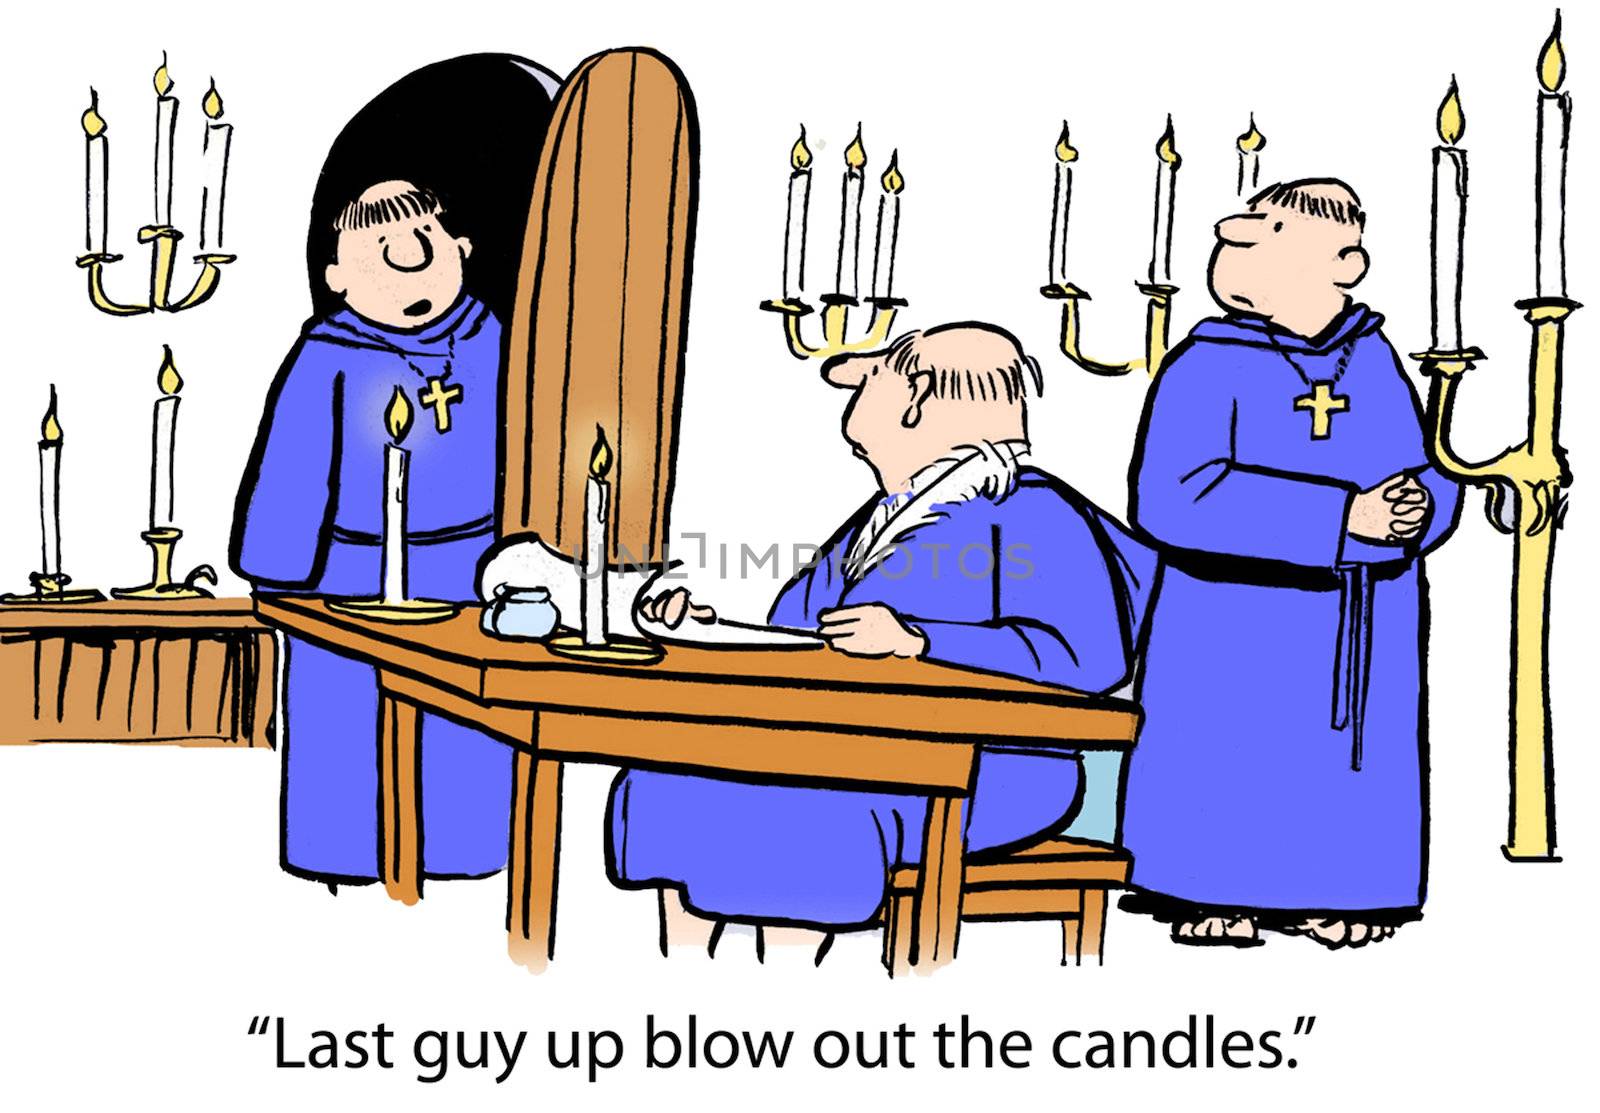 "Last guy up blow out the candles."